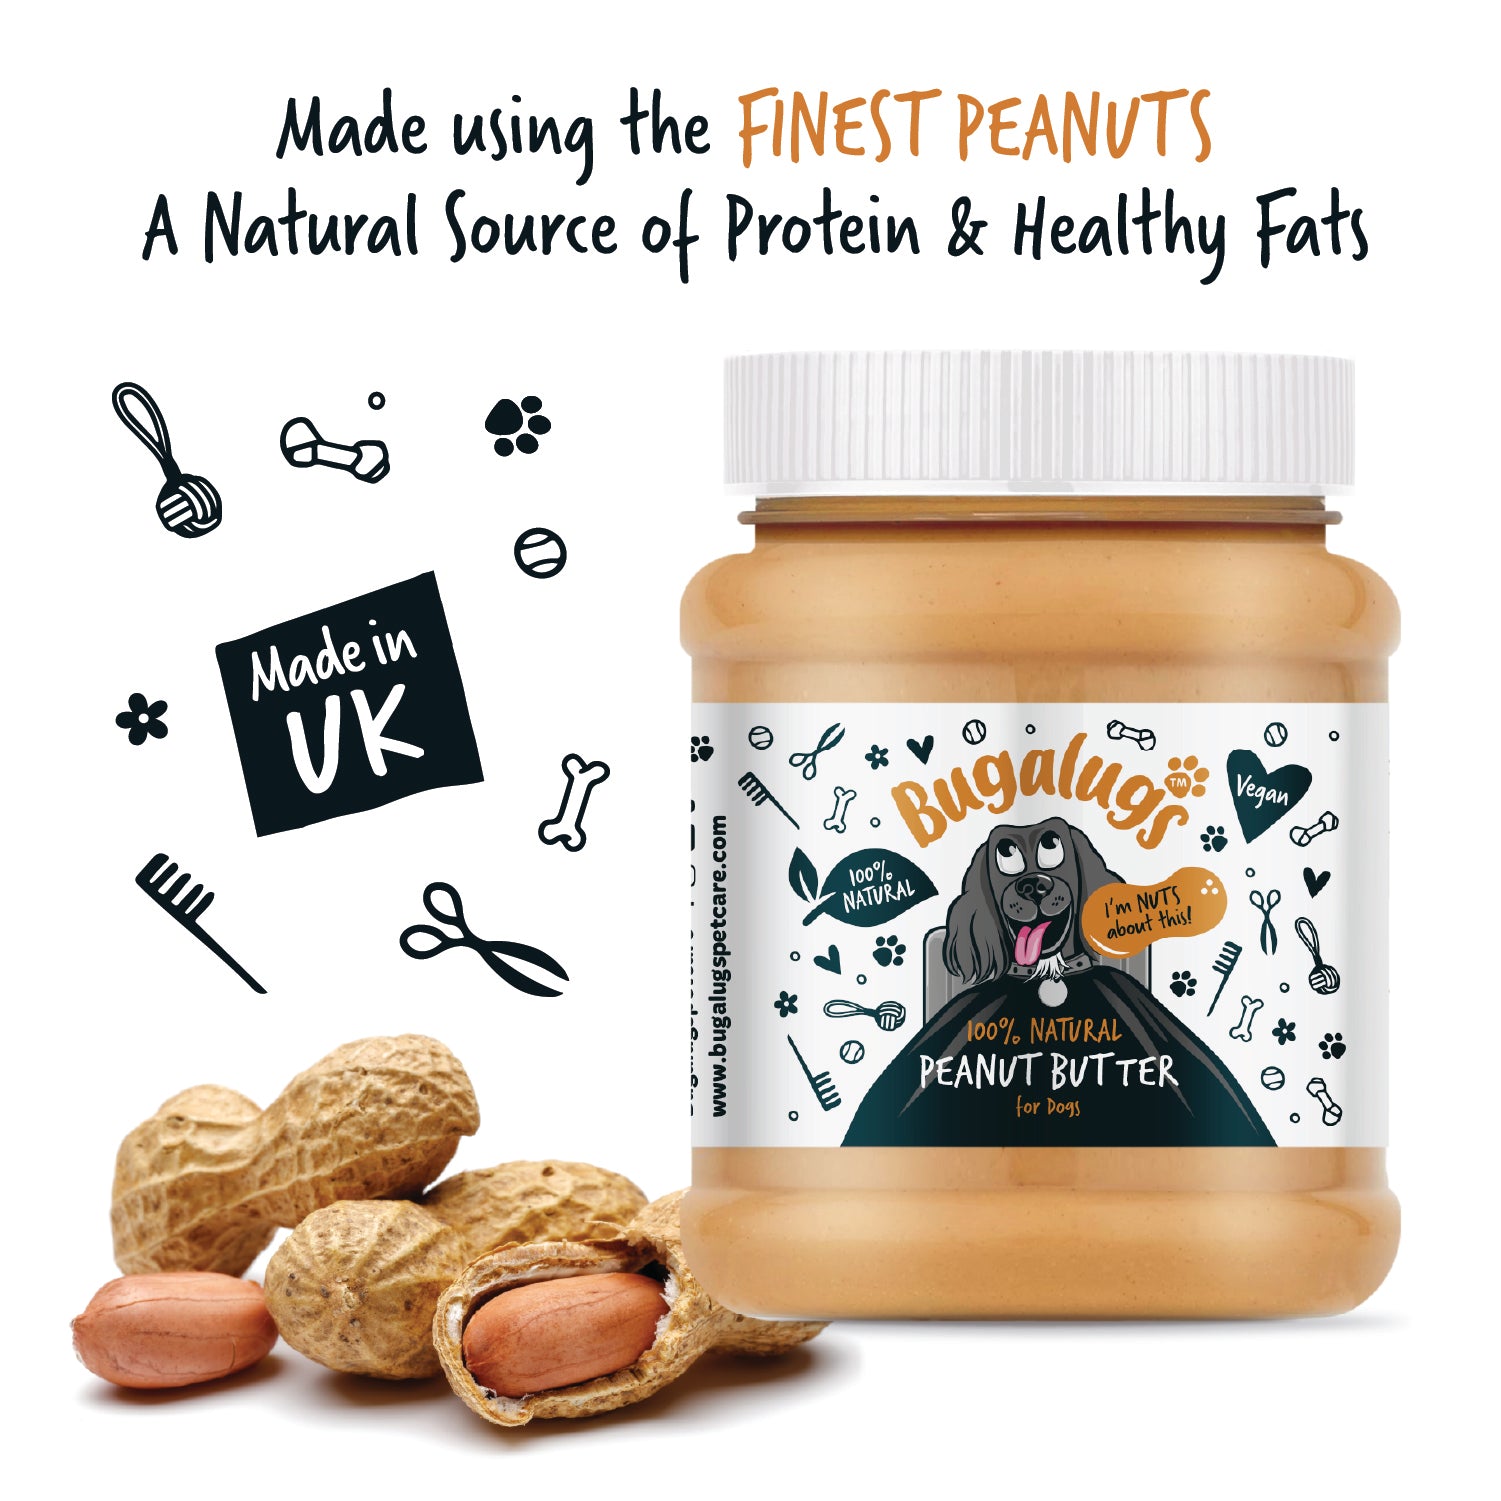 Bugalugs 100% Natural Peanut Butter for Dogs - Made using the finest peanuts